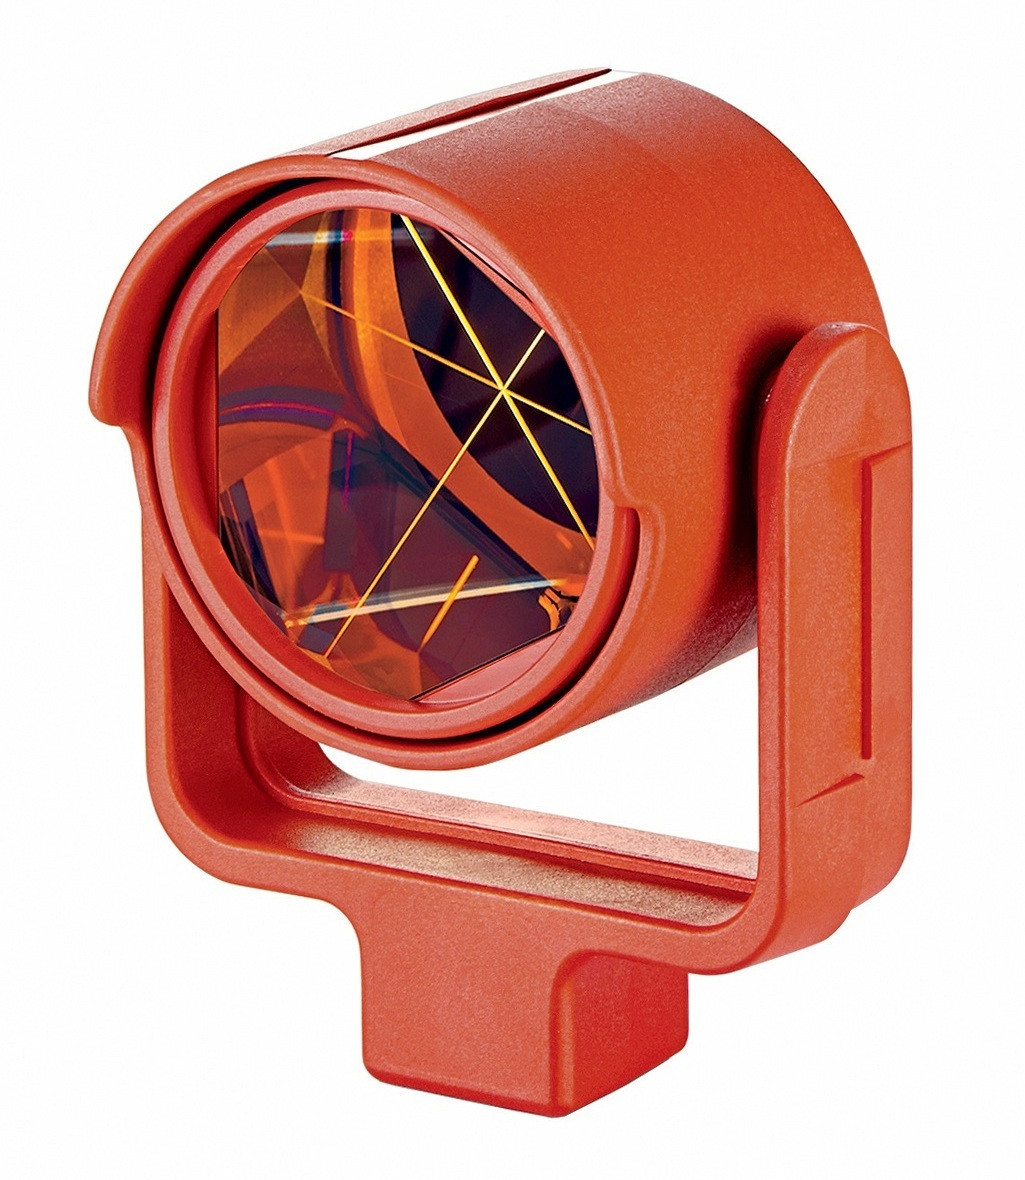 NEW GPH3 TRIPLE PRISM WITH HOLDER FOR LEICA TOTAL STATION 